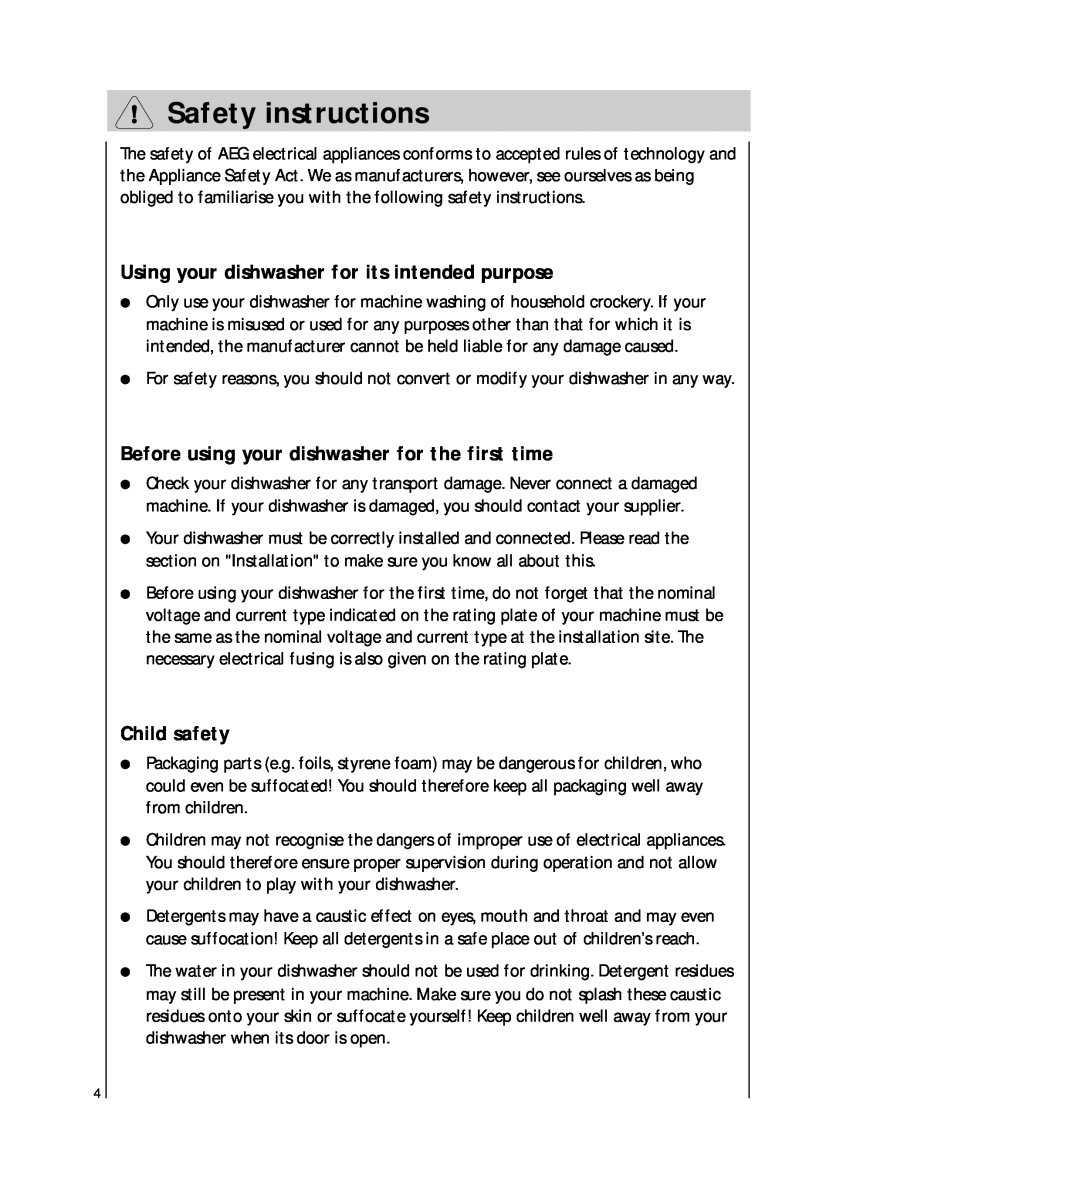 AEG 54710 operating instructions Safety instructions, Using your dishwasher for its intended purpose, Child safety 